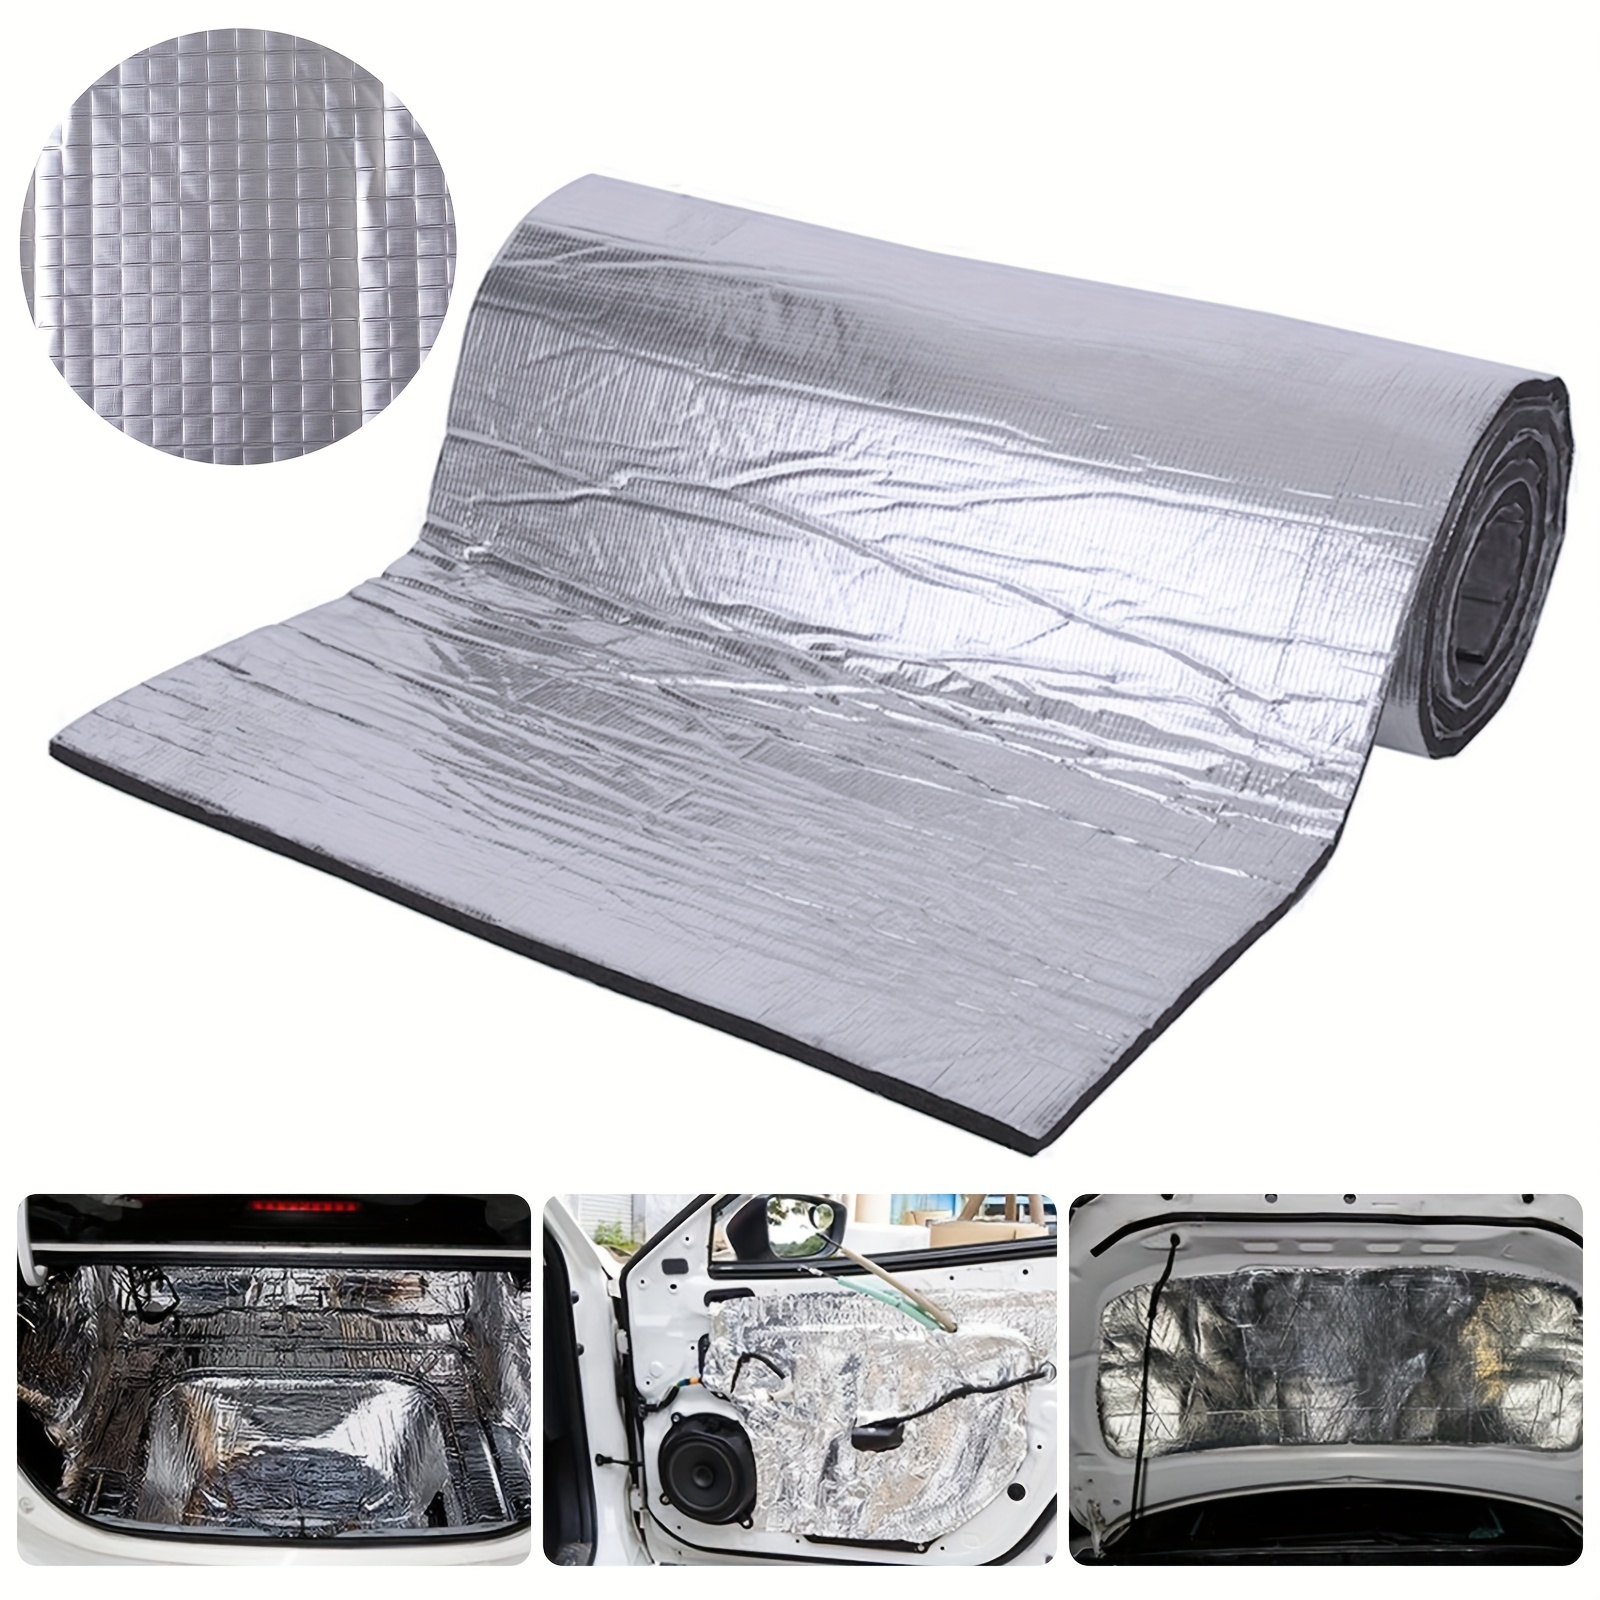 Heat Shield Automotive Mat Waterproof Noise Control Mat Fireproof Insulation  Pad Car Accessories Thermal Shield And Sound - AliExpress